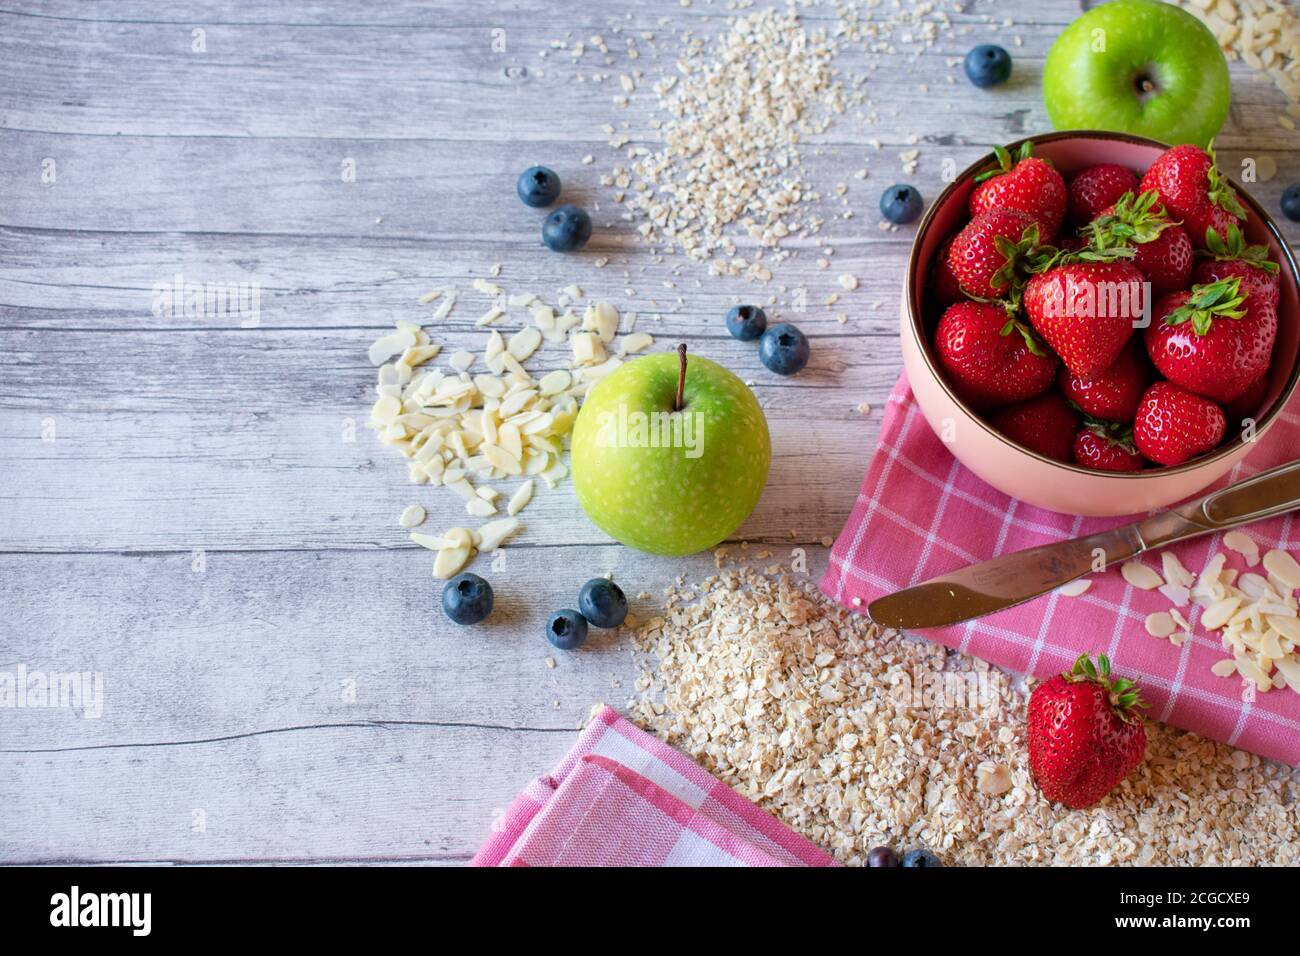 breakfast ingredients healthy carbohydrates Stock Photo